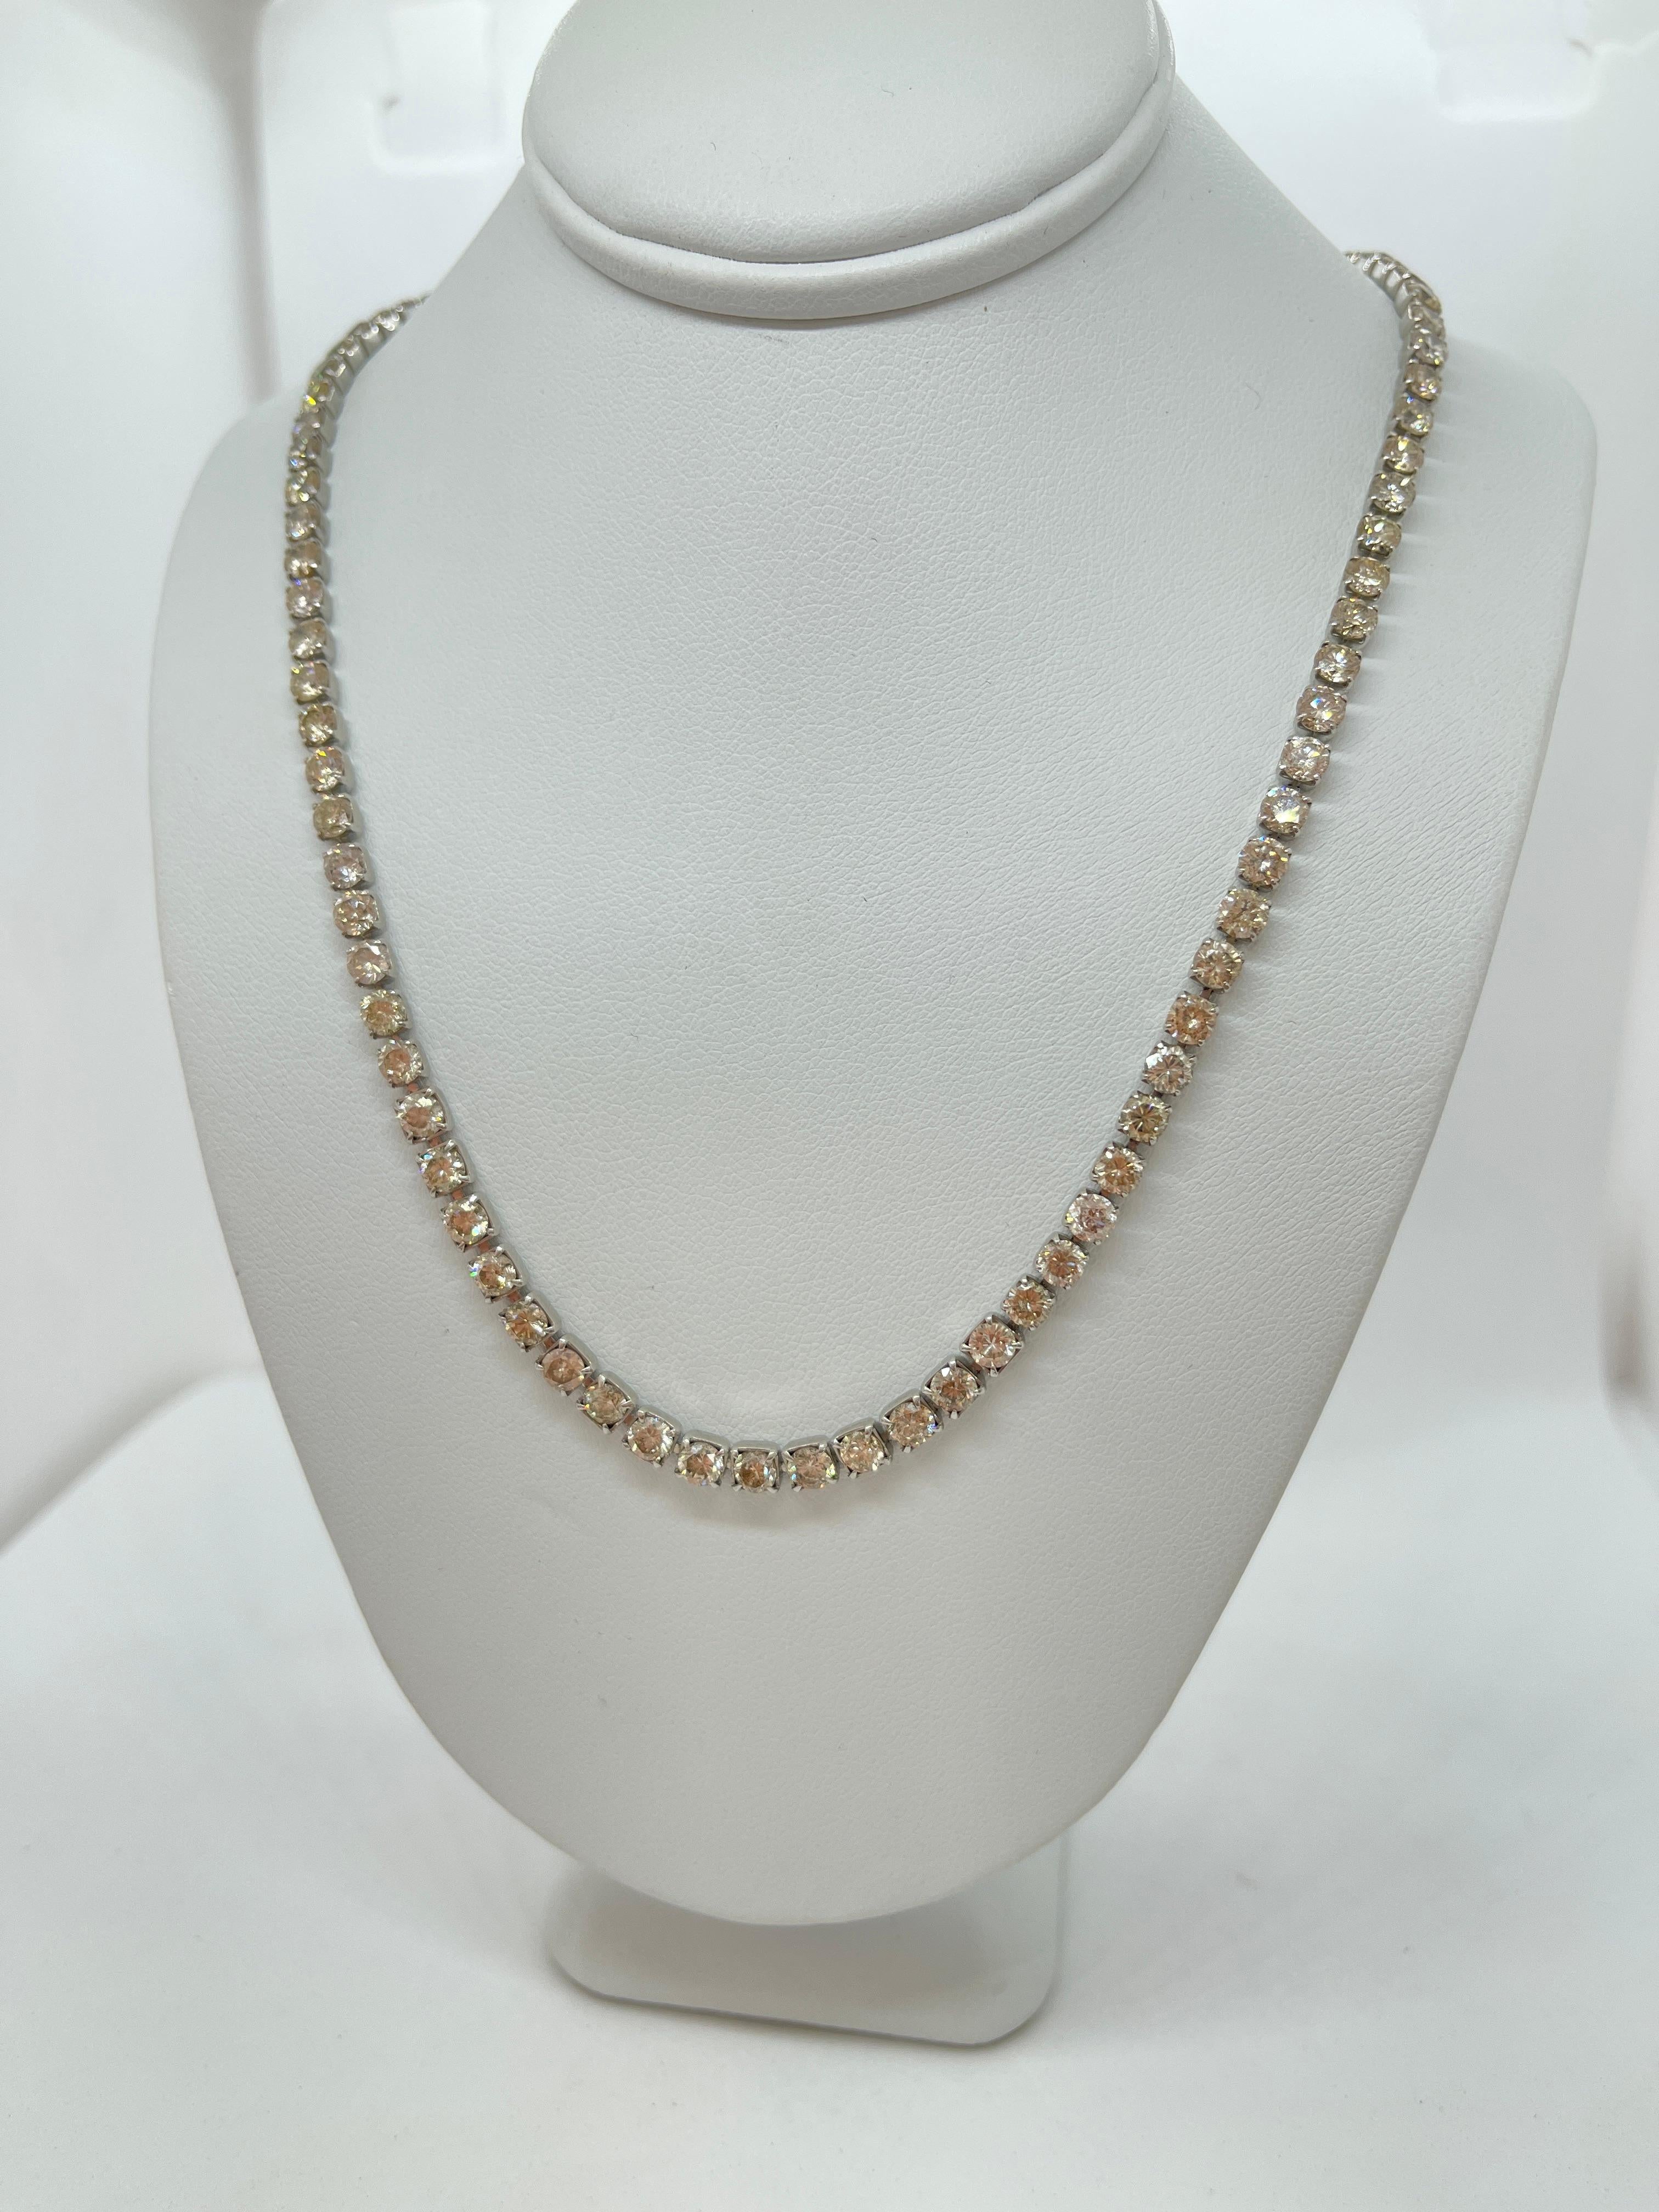 Vintage Earth Mined Genuine Diamond Platinum Necklace Circa 1940s with Valuation For Sale 3